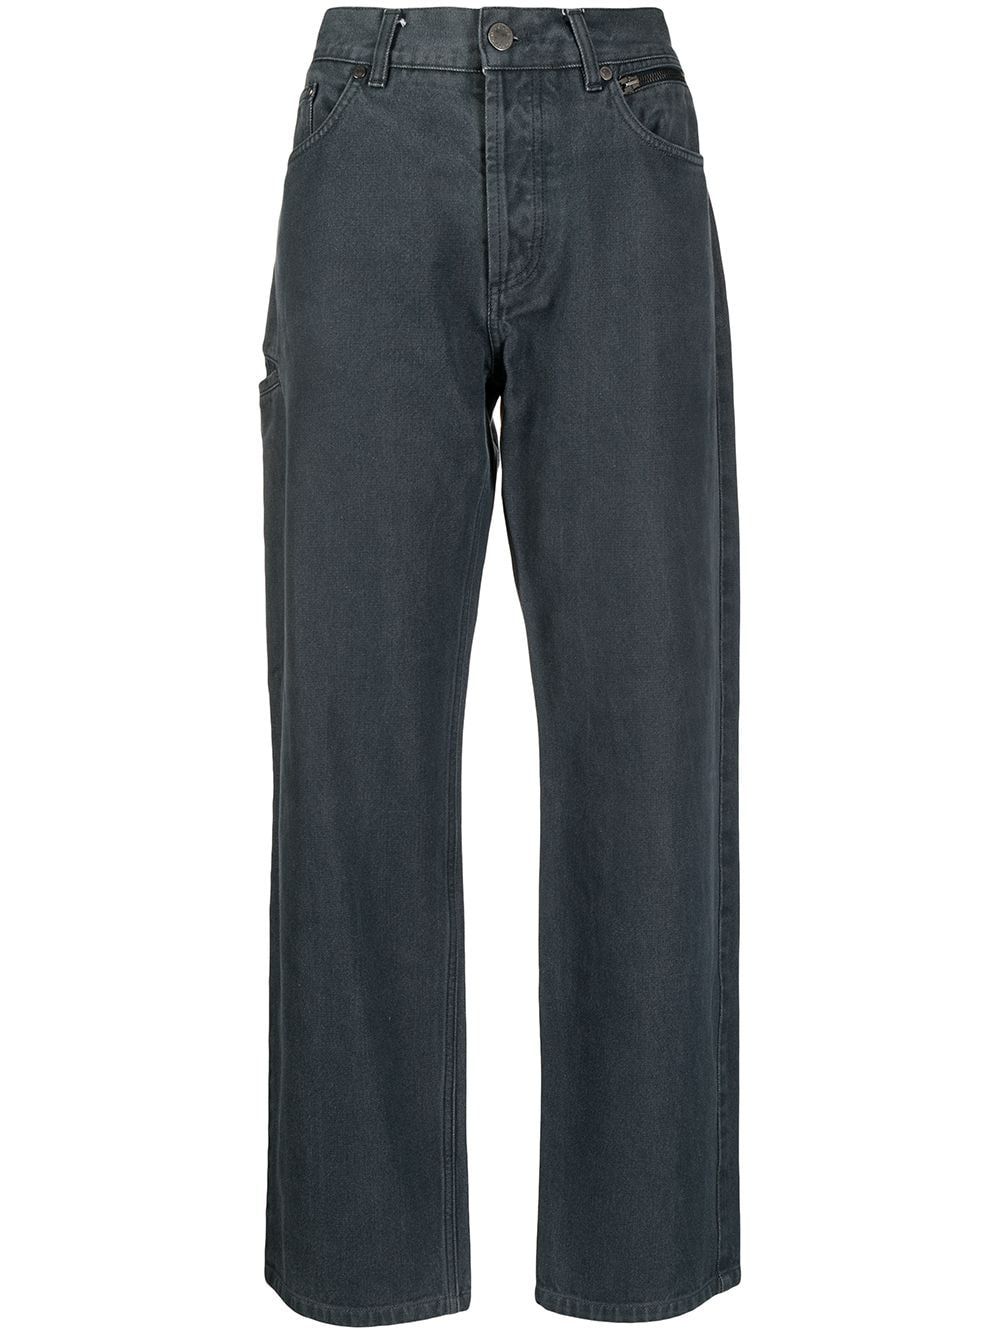 2010s Pre-Owned Straight-Leg Jeans